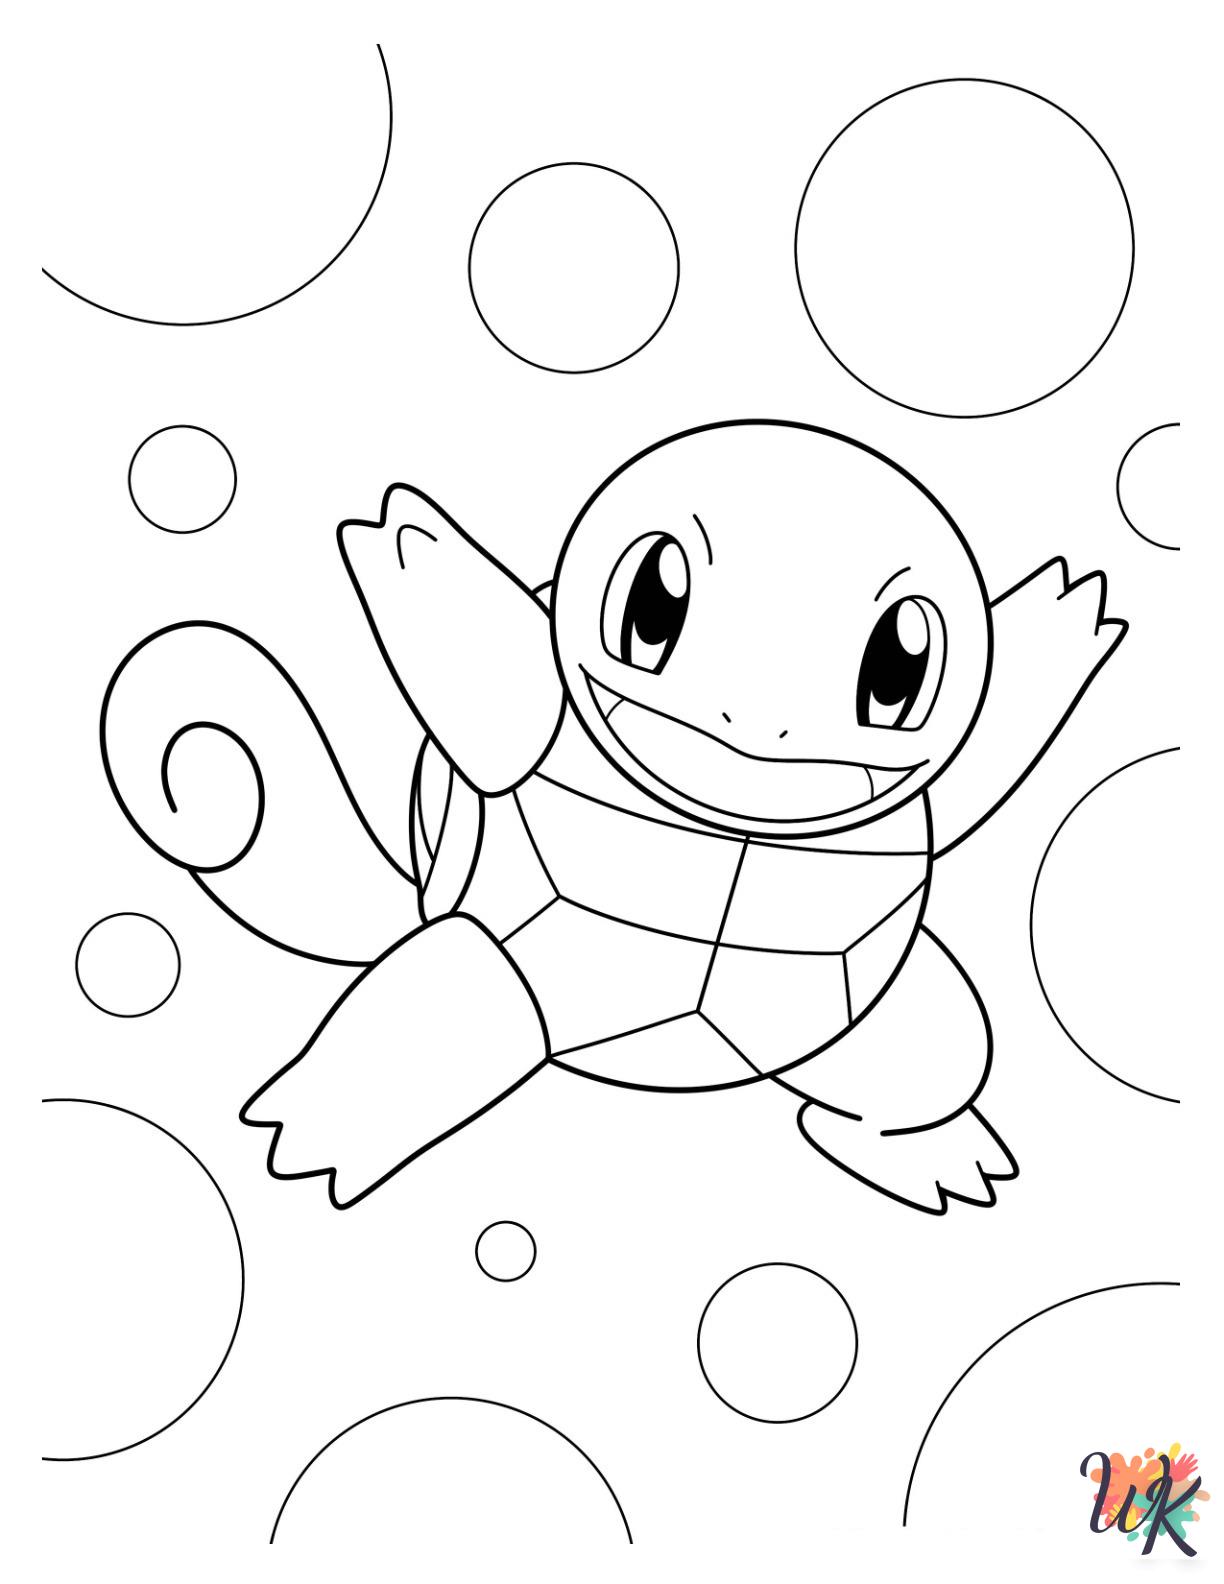 Squirtle coloring pages for kids